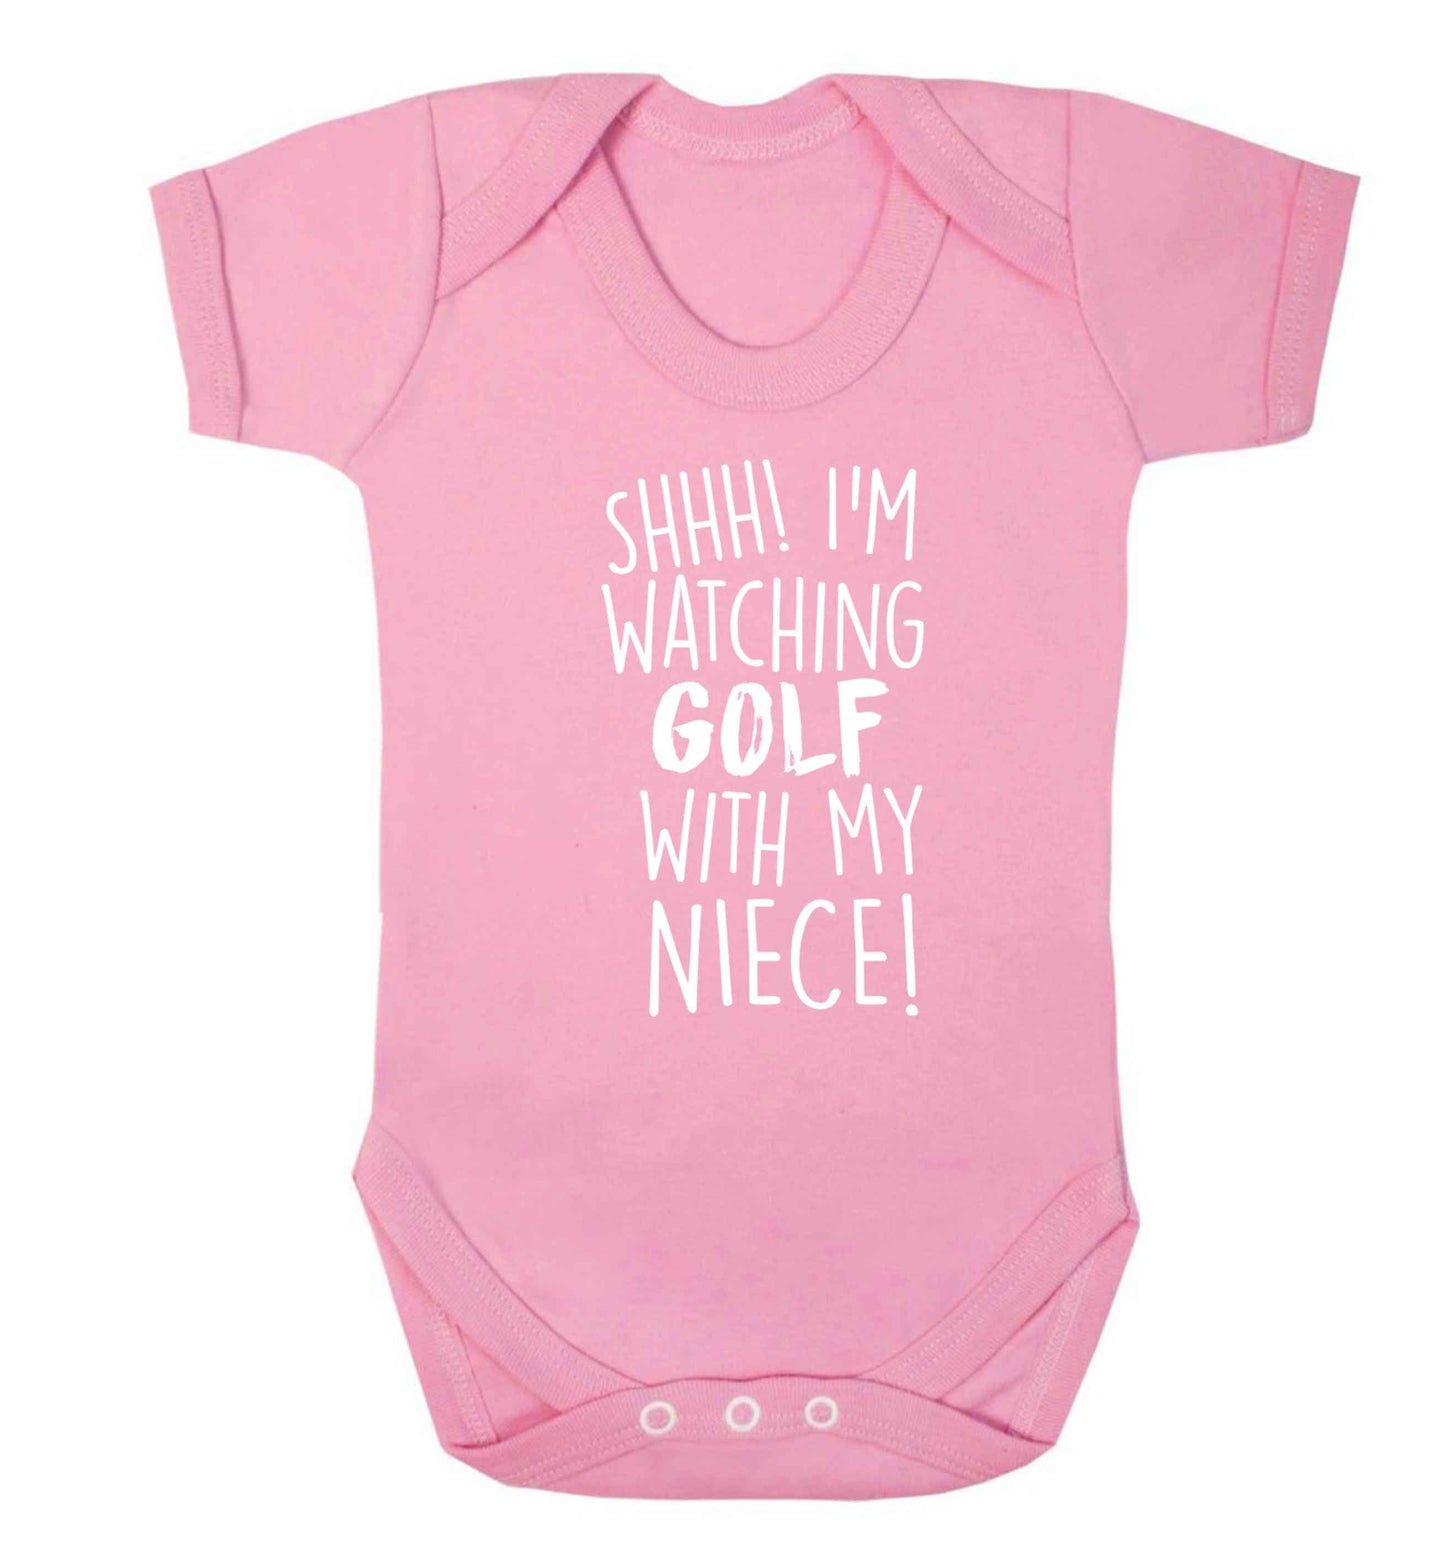 Shh I'm watching golf with my niece Baby Vest pale pink 18-24 months